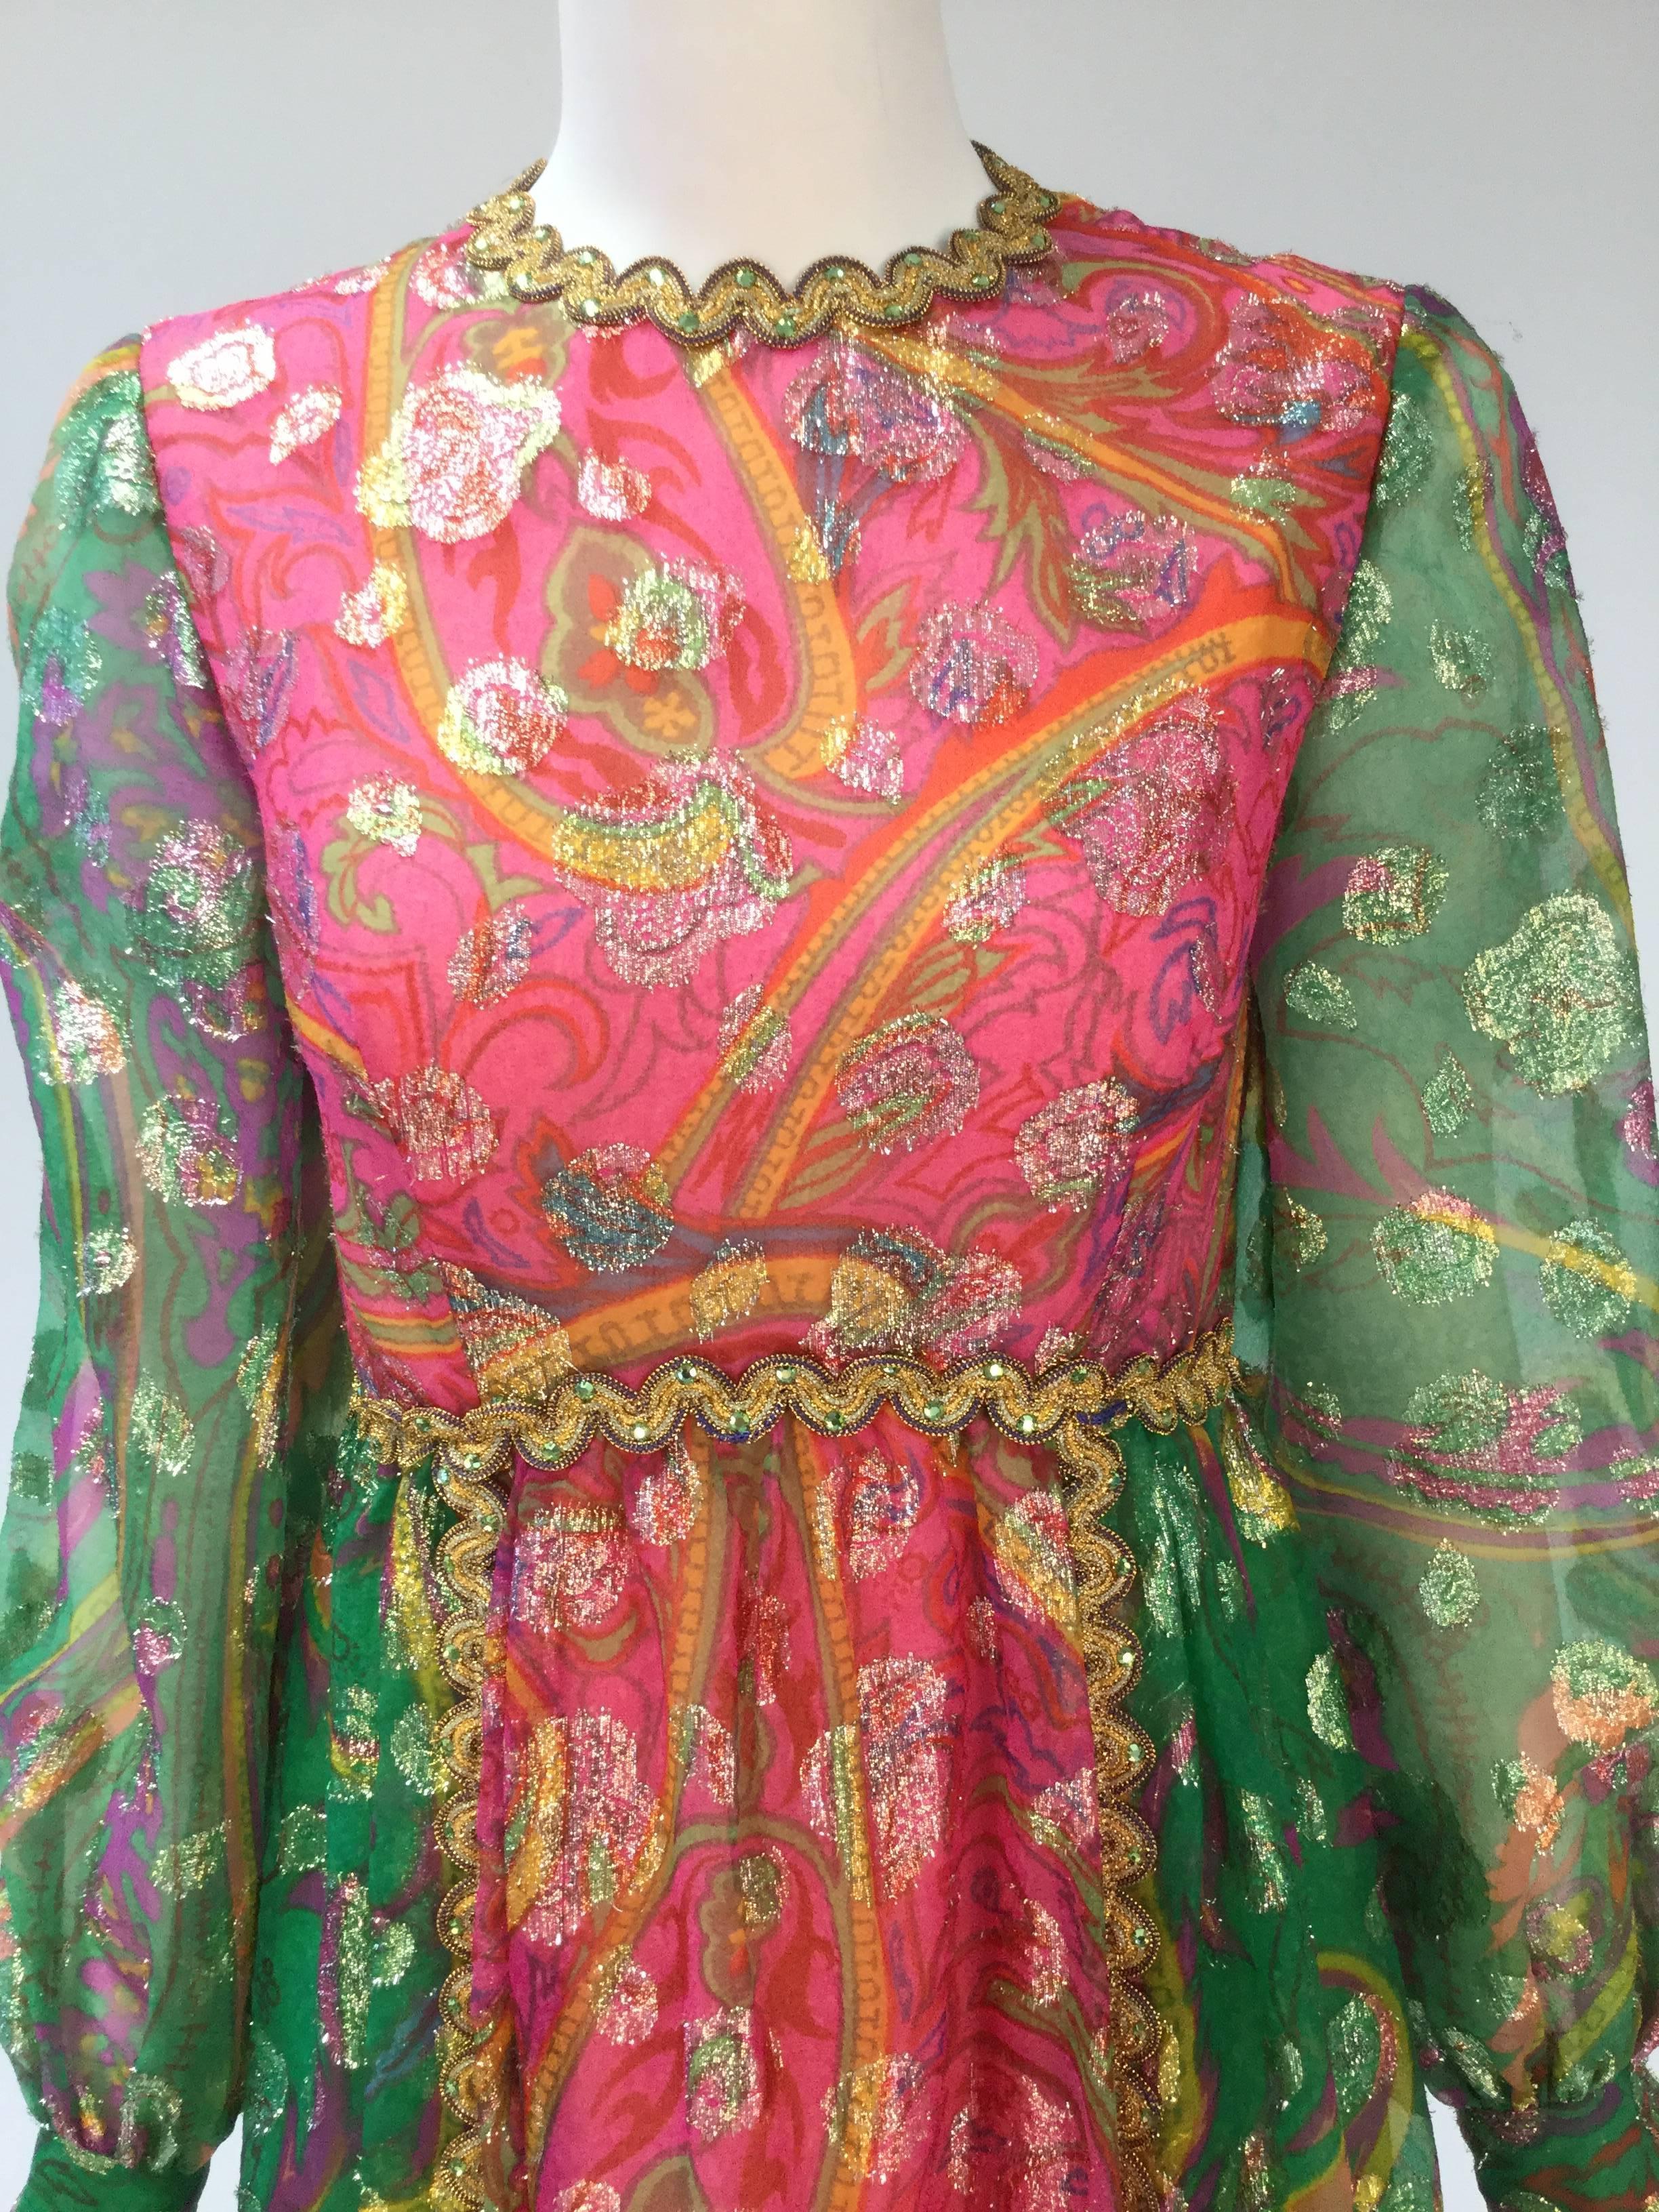 
Bold and vibrant statement piece from the Gino Charles label.  Pink and green dress is trimmed in gold around the neckline, sleeves, waistline and down the skirt of dress. The gorgeous trim is adorned with green rhinestones. Metallic threading